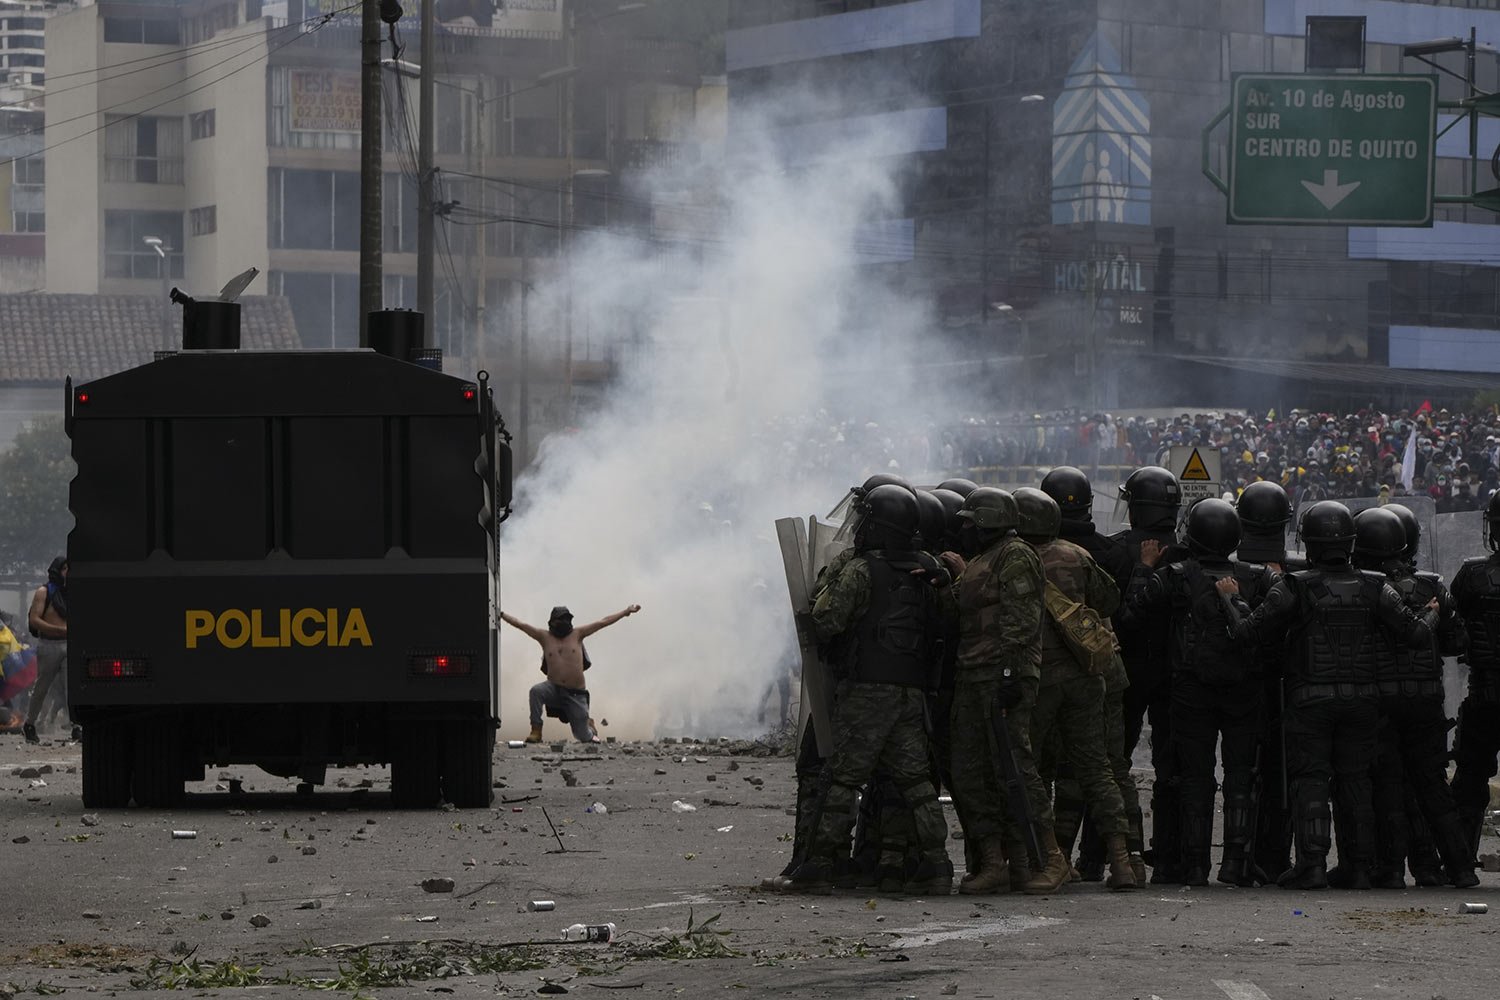  Protesters clash with police during demonstrations against the government of President Guillermo Lasso and rising fuel prices in Quito, Ecuador, Tuesday, June 21, 2022. (AP Photo/Dolores Ochoa) 